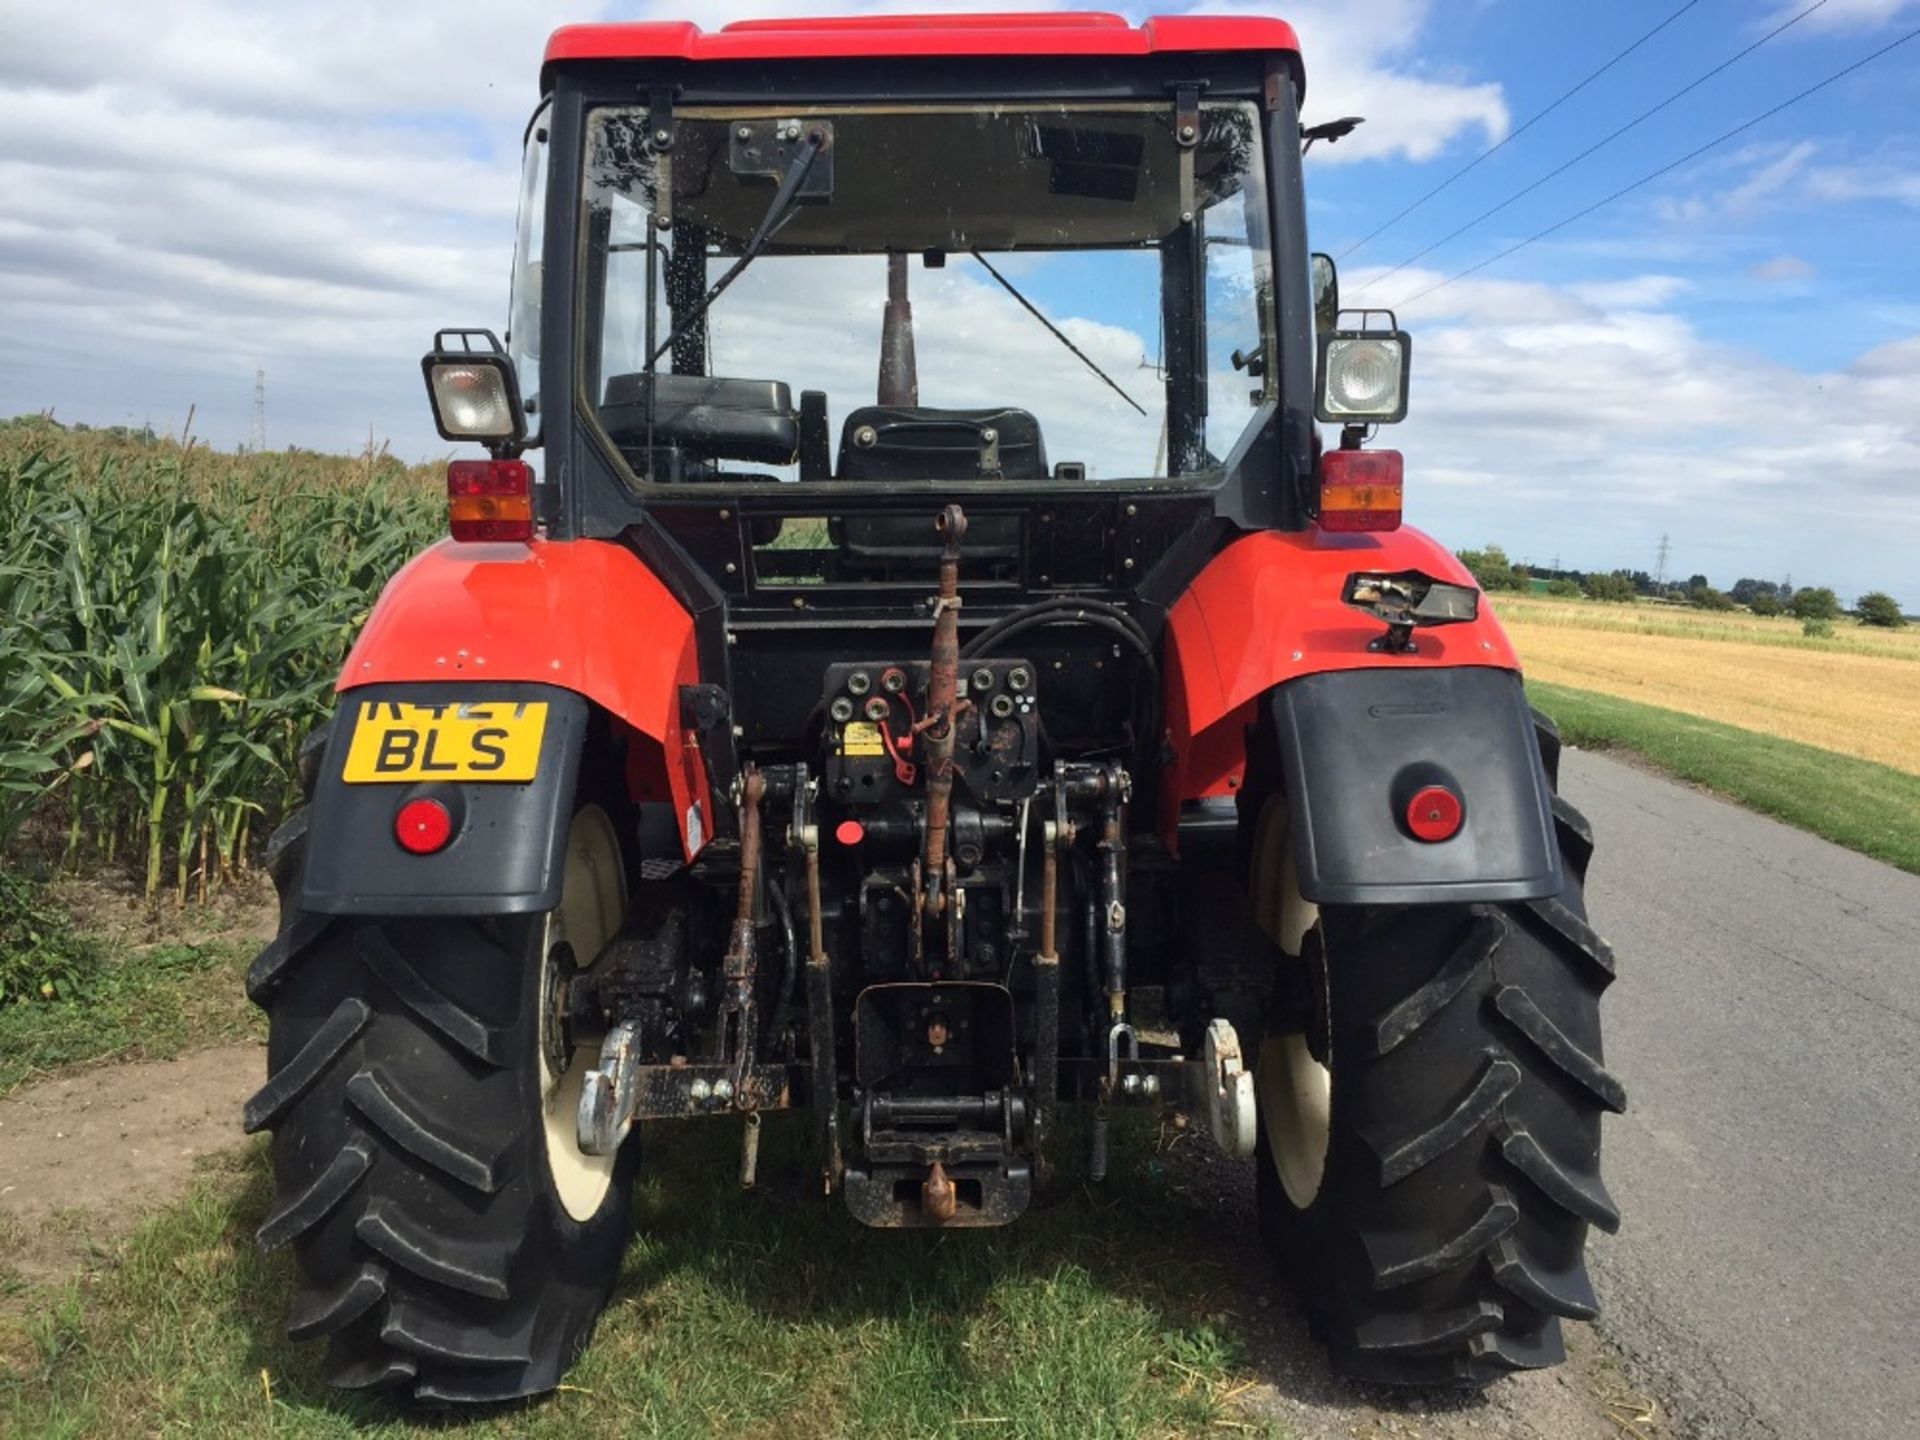 1997 Zetor 6341 4wd Tractor with Front Linkage. Showing 2721 hrs Ser No 001248 - Image 3 of 3